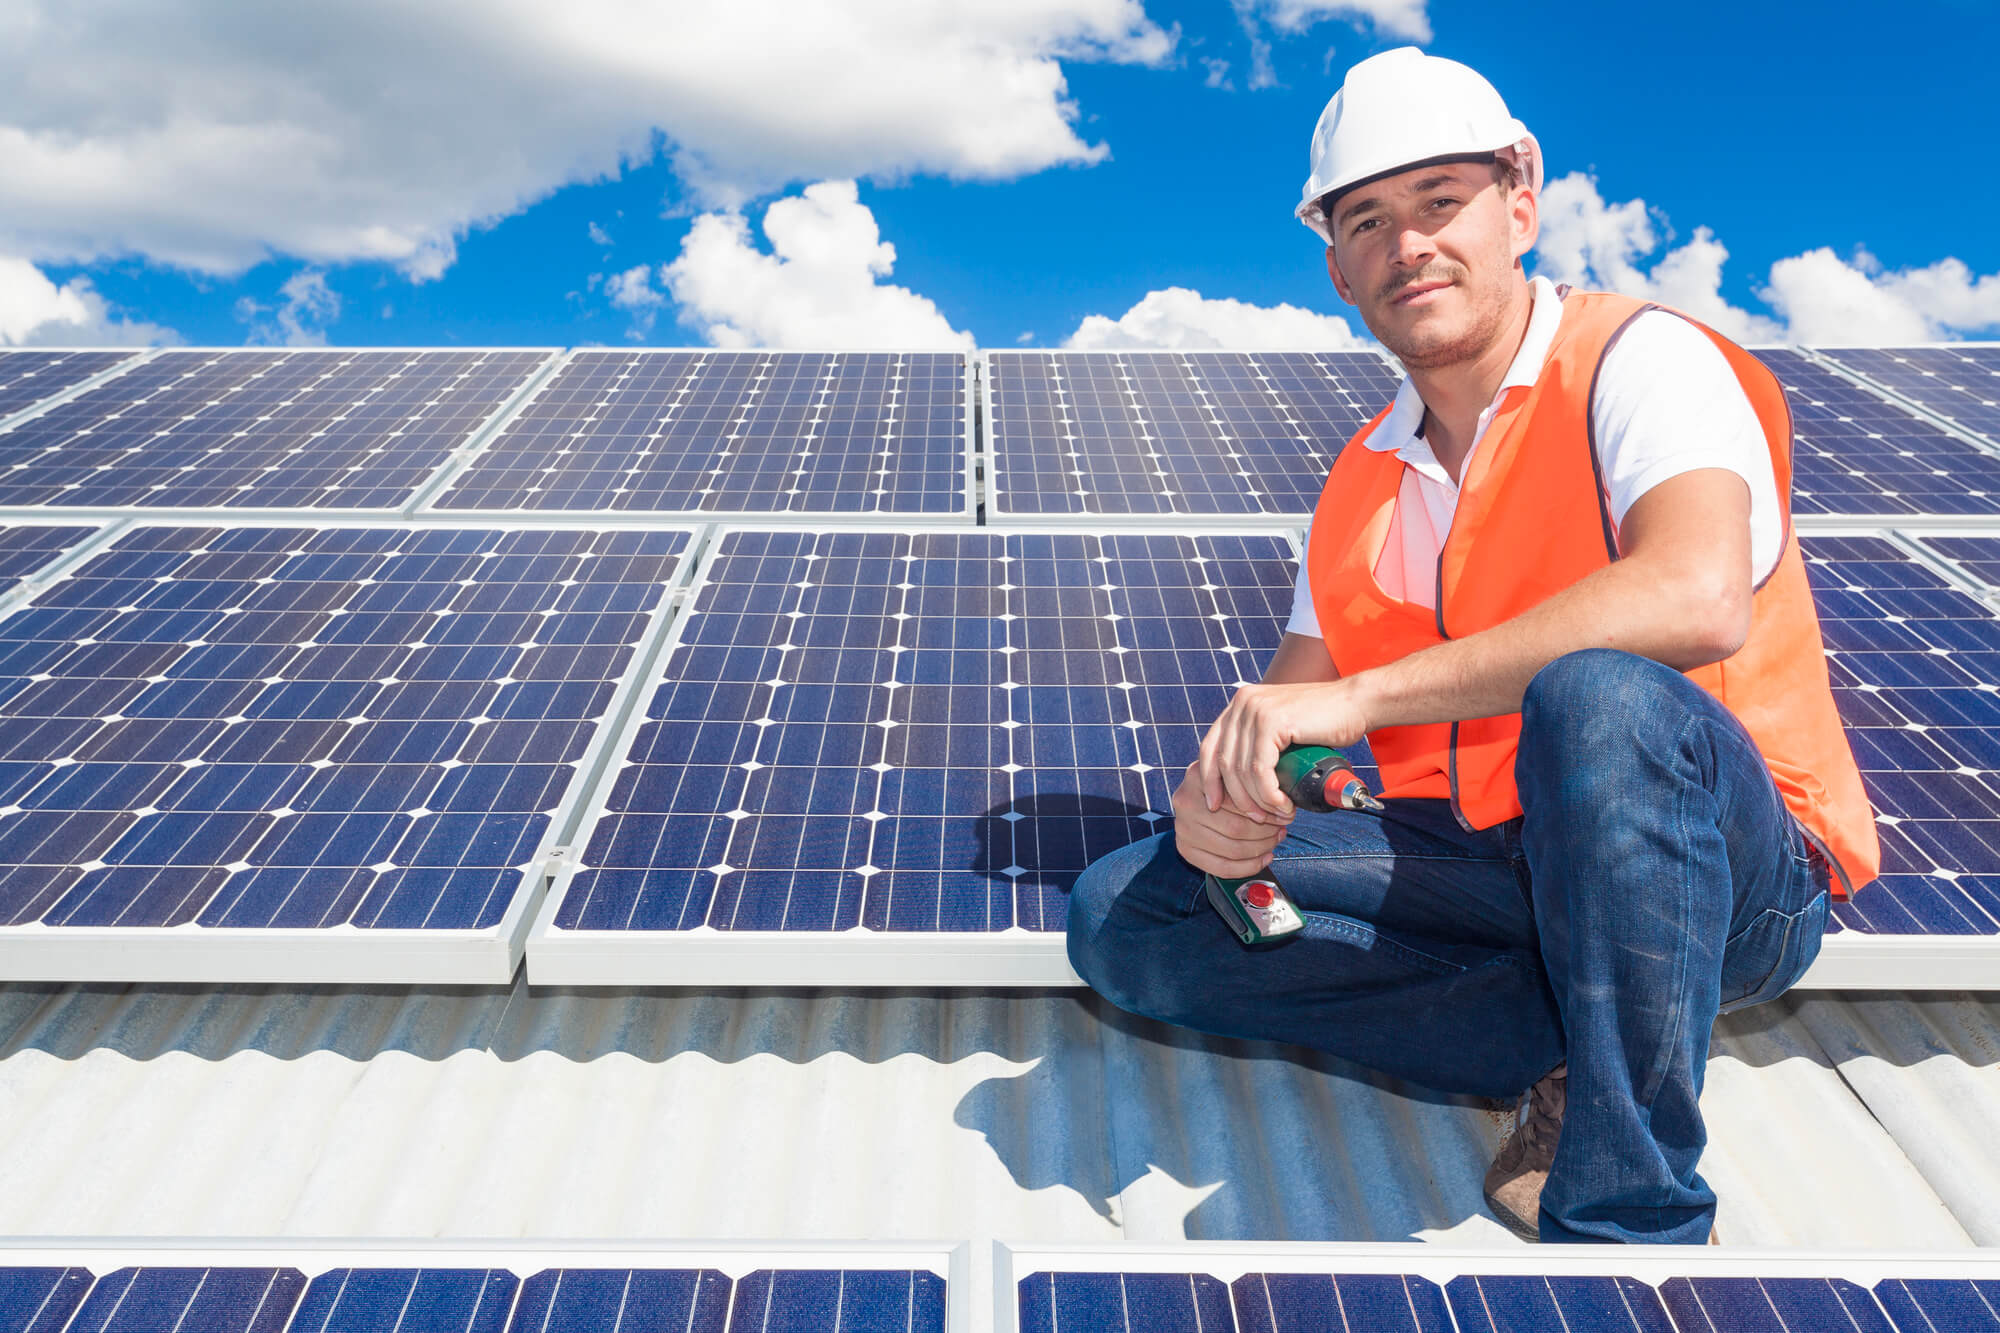 How to Become a Certified Solar Installer